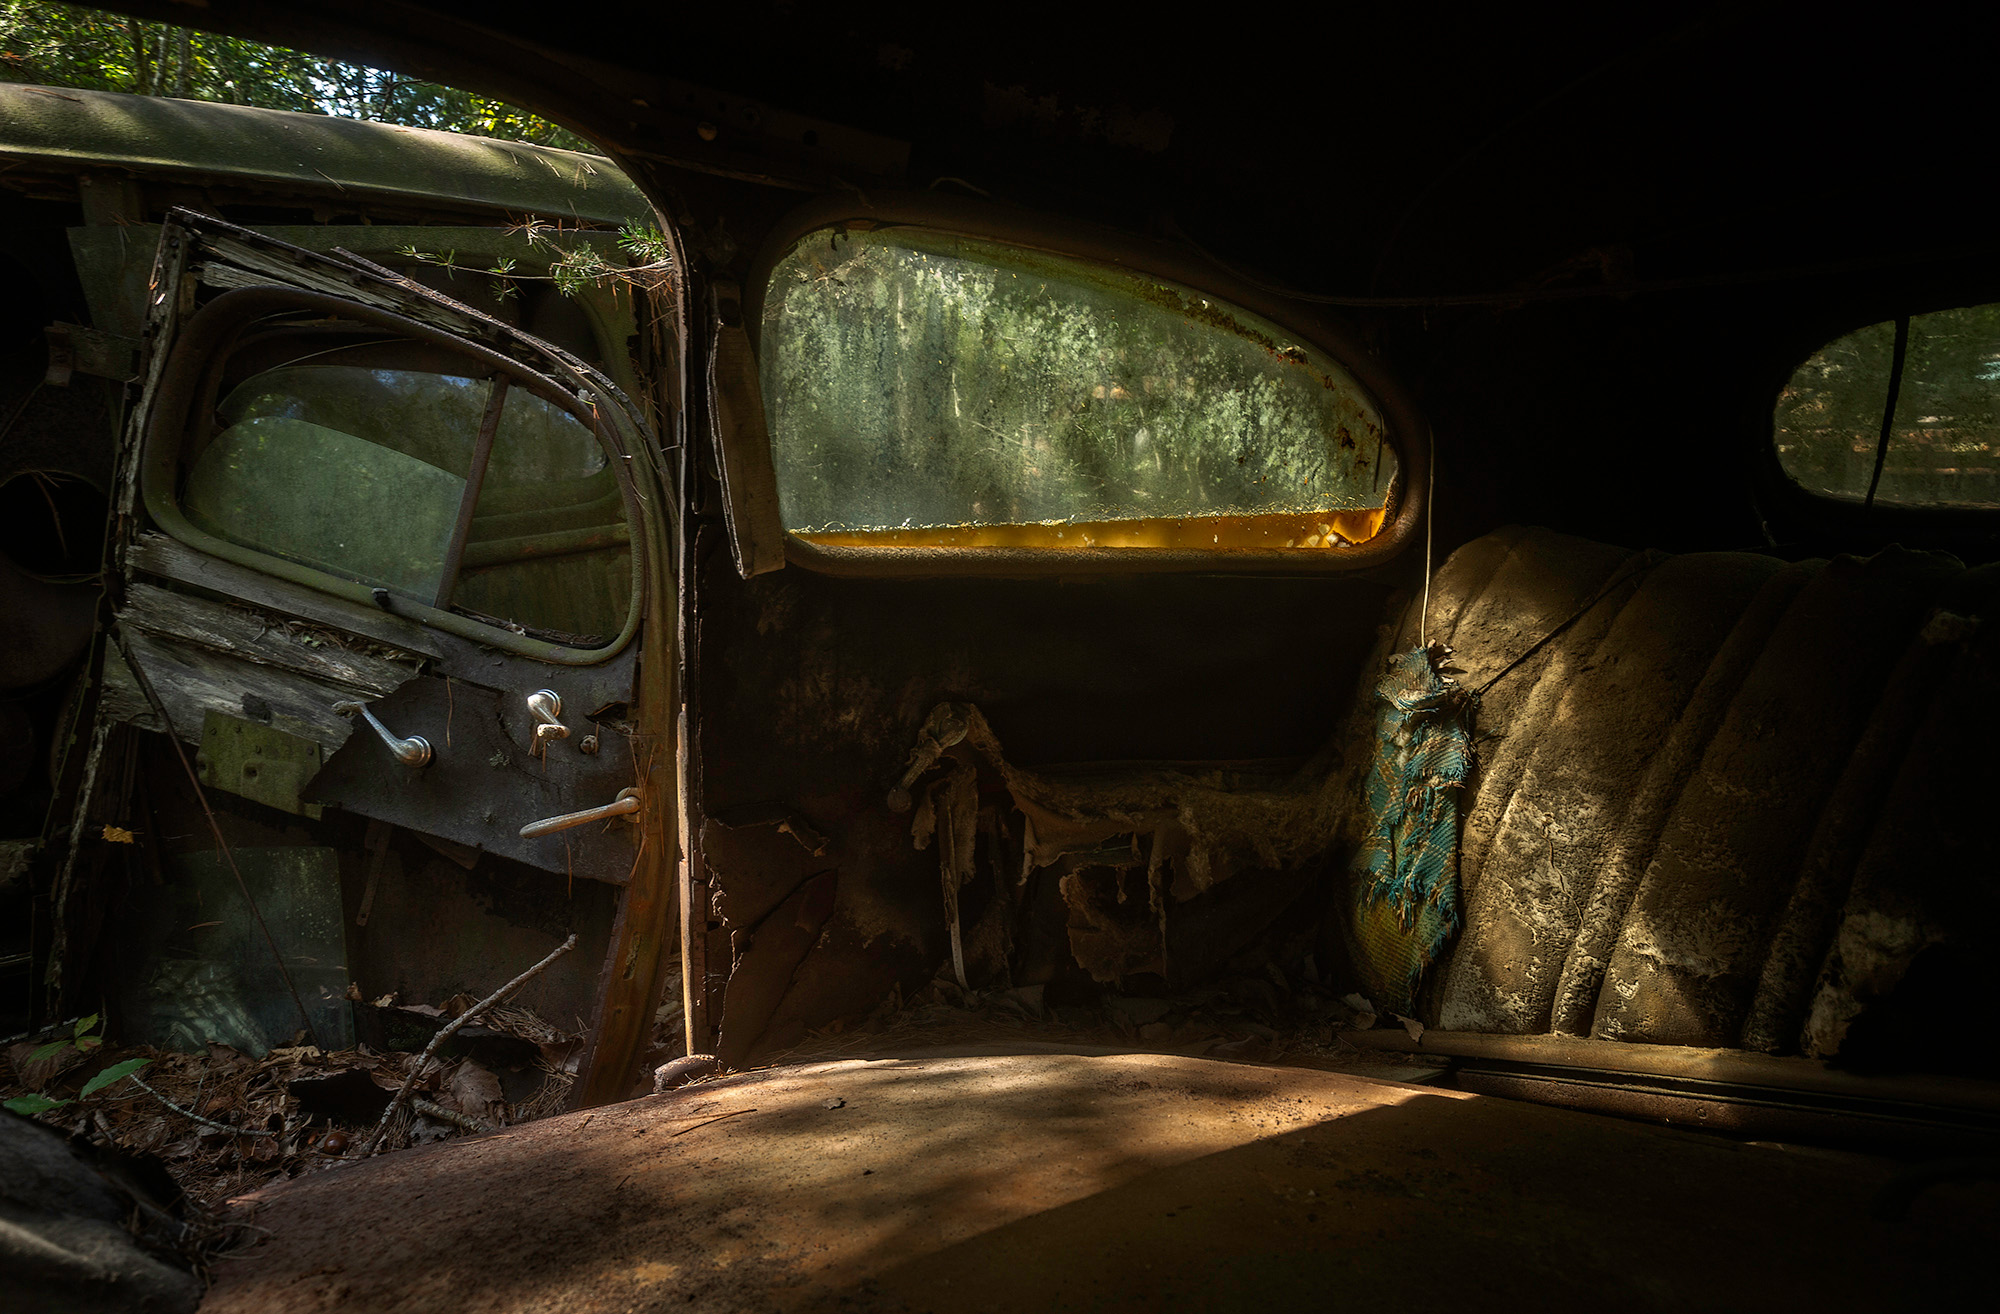 The interior of an abandoned car.